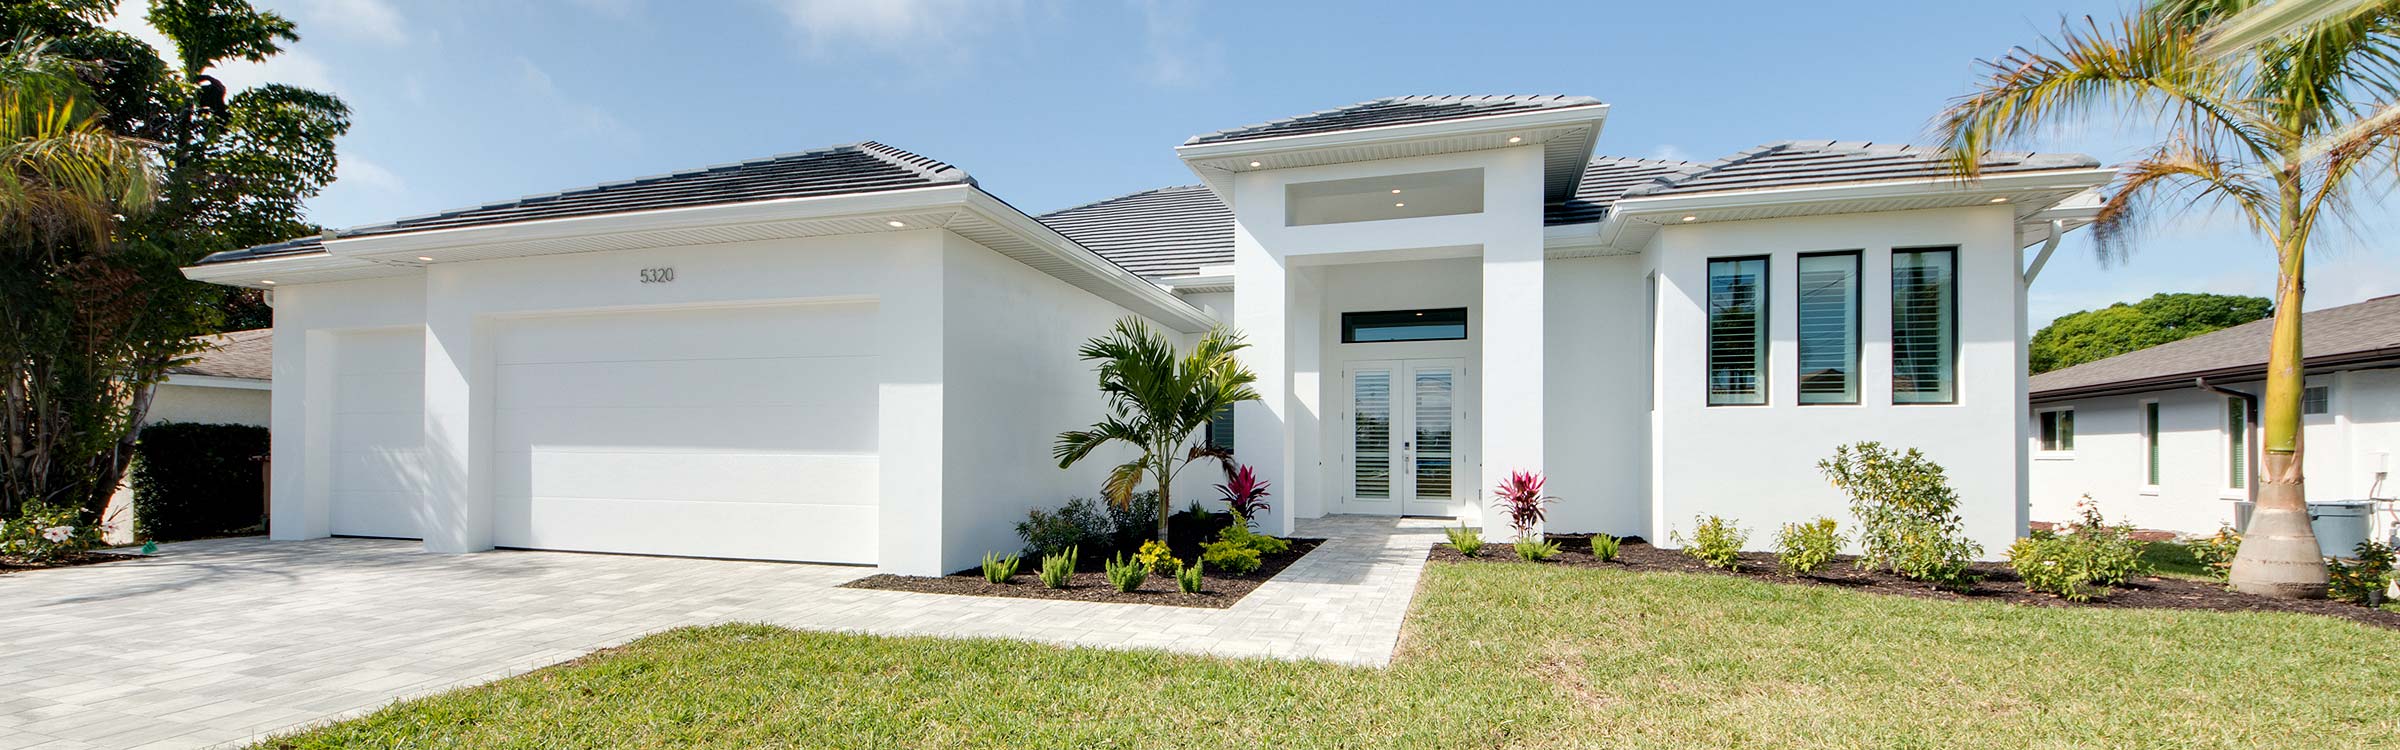 Professional property management of our vacation homes in Cape Coral